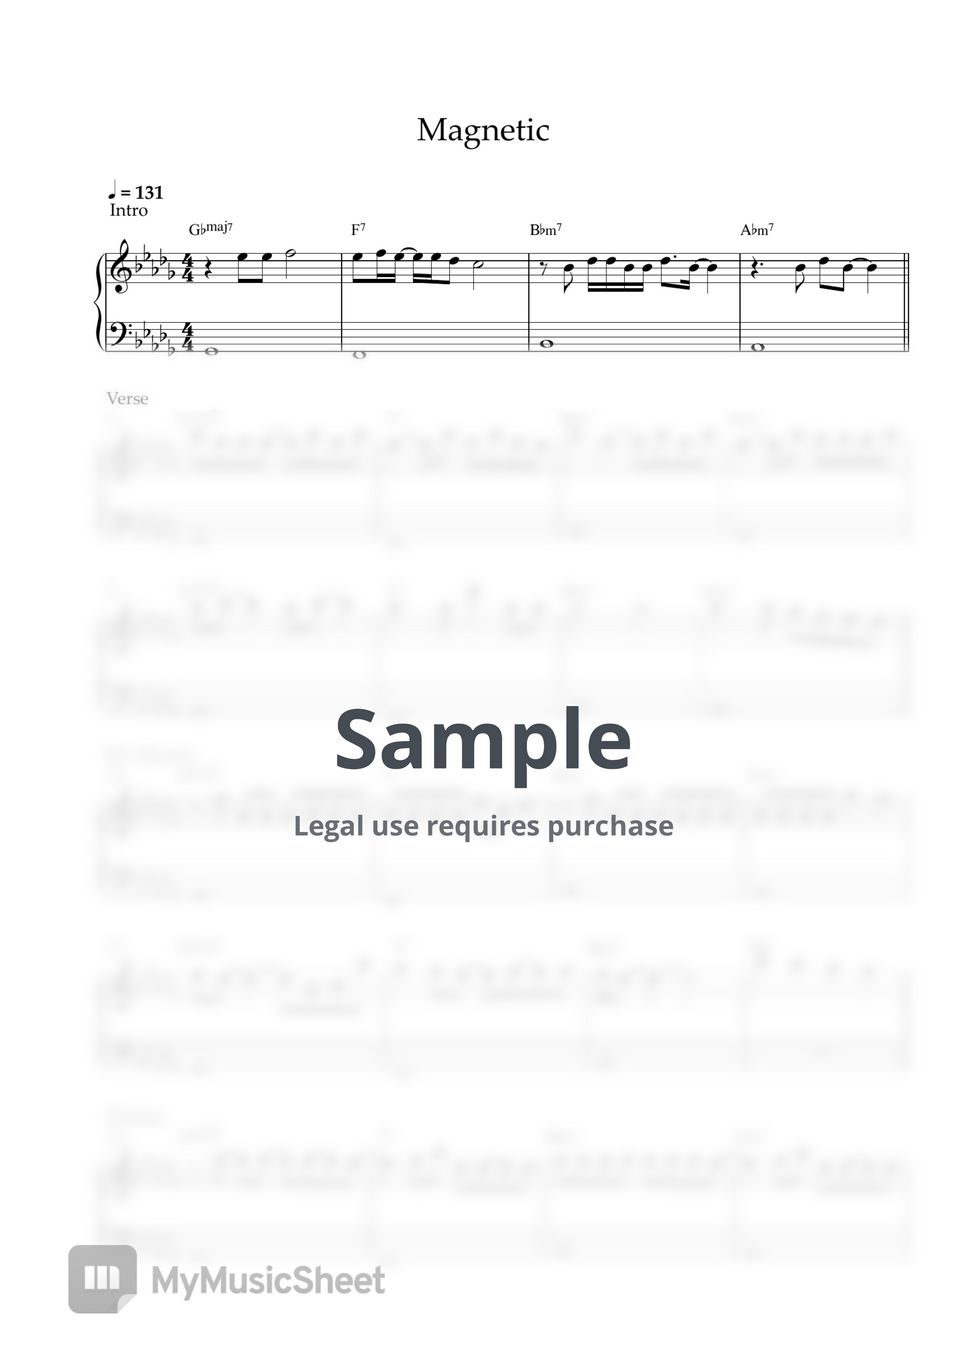 ILLIT - Magnetic (EASY PIANO SHEET) by Pianella Piano